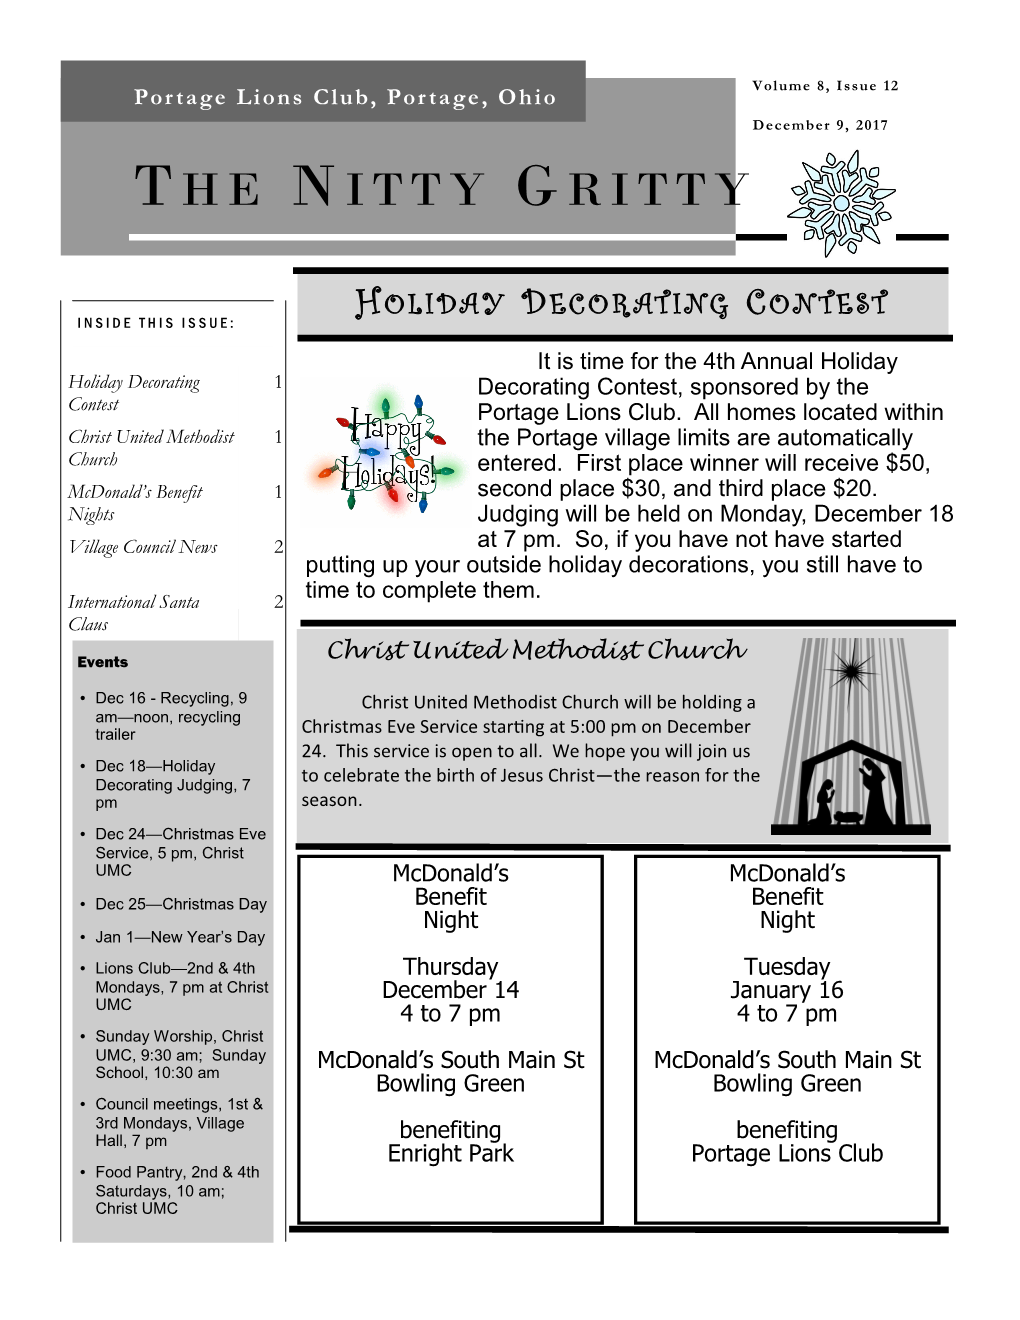 THE NITTY GRITTY Merry Village Council News Join Us Once Again to Help Raise Funds for ENRIGHT PARK